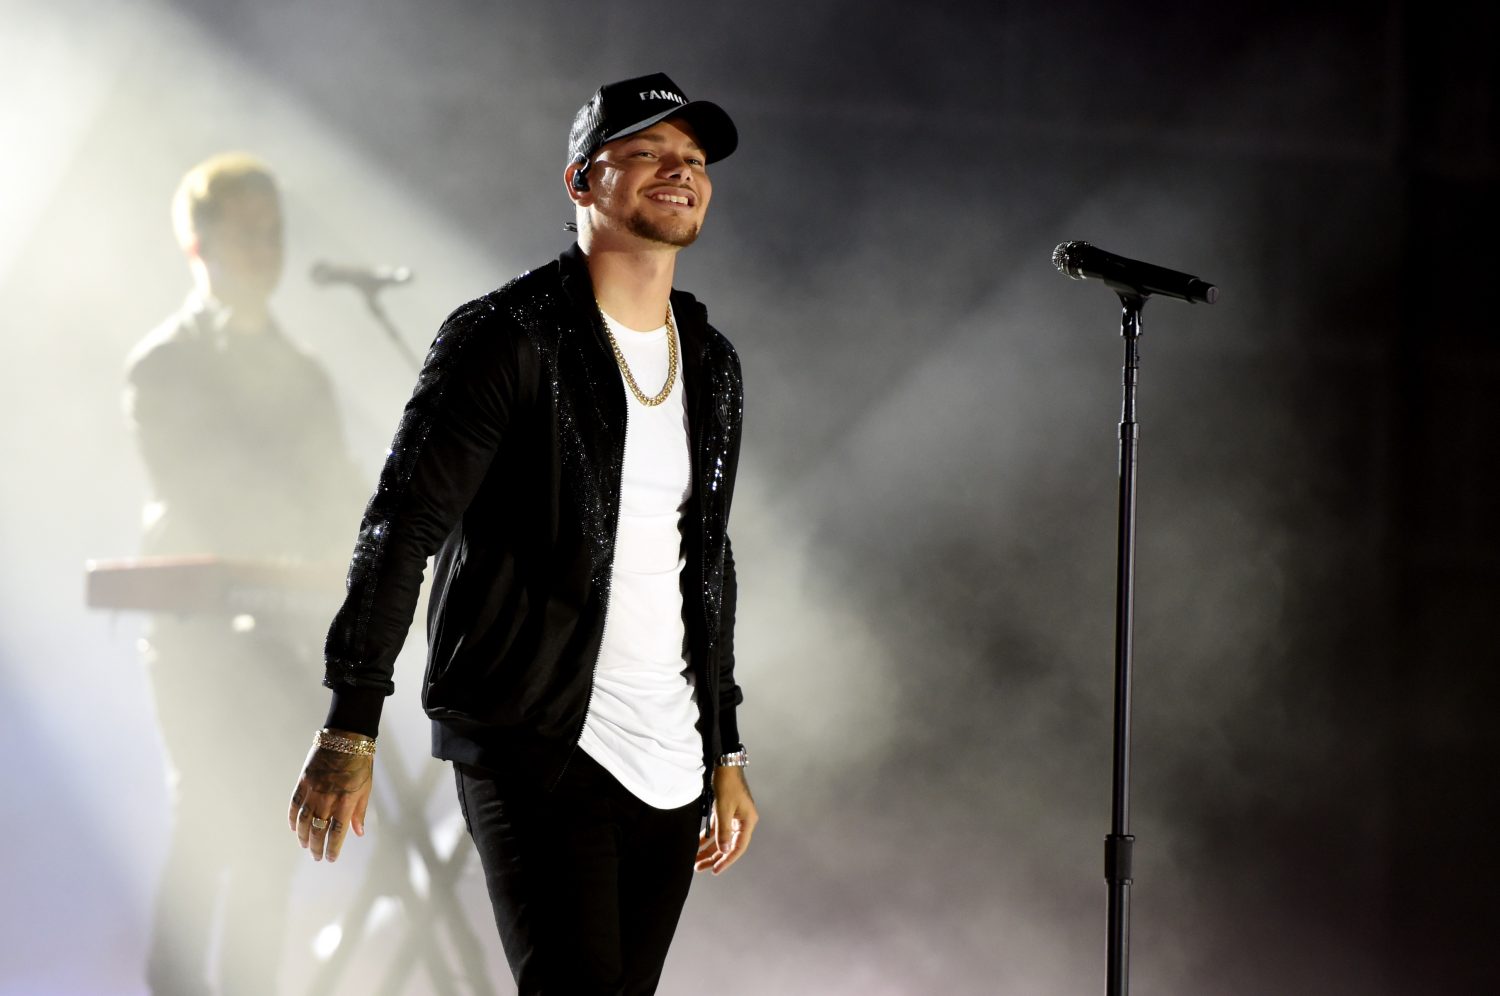 Get the Exclusive BehindtheScenes Look at Kane Brown’s CMA Fest